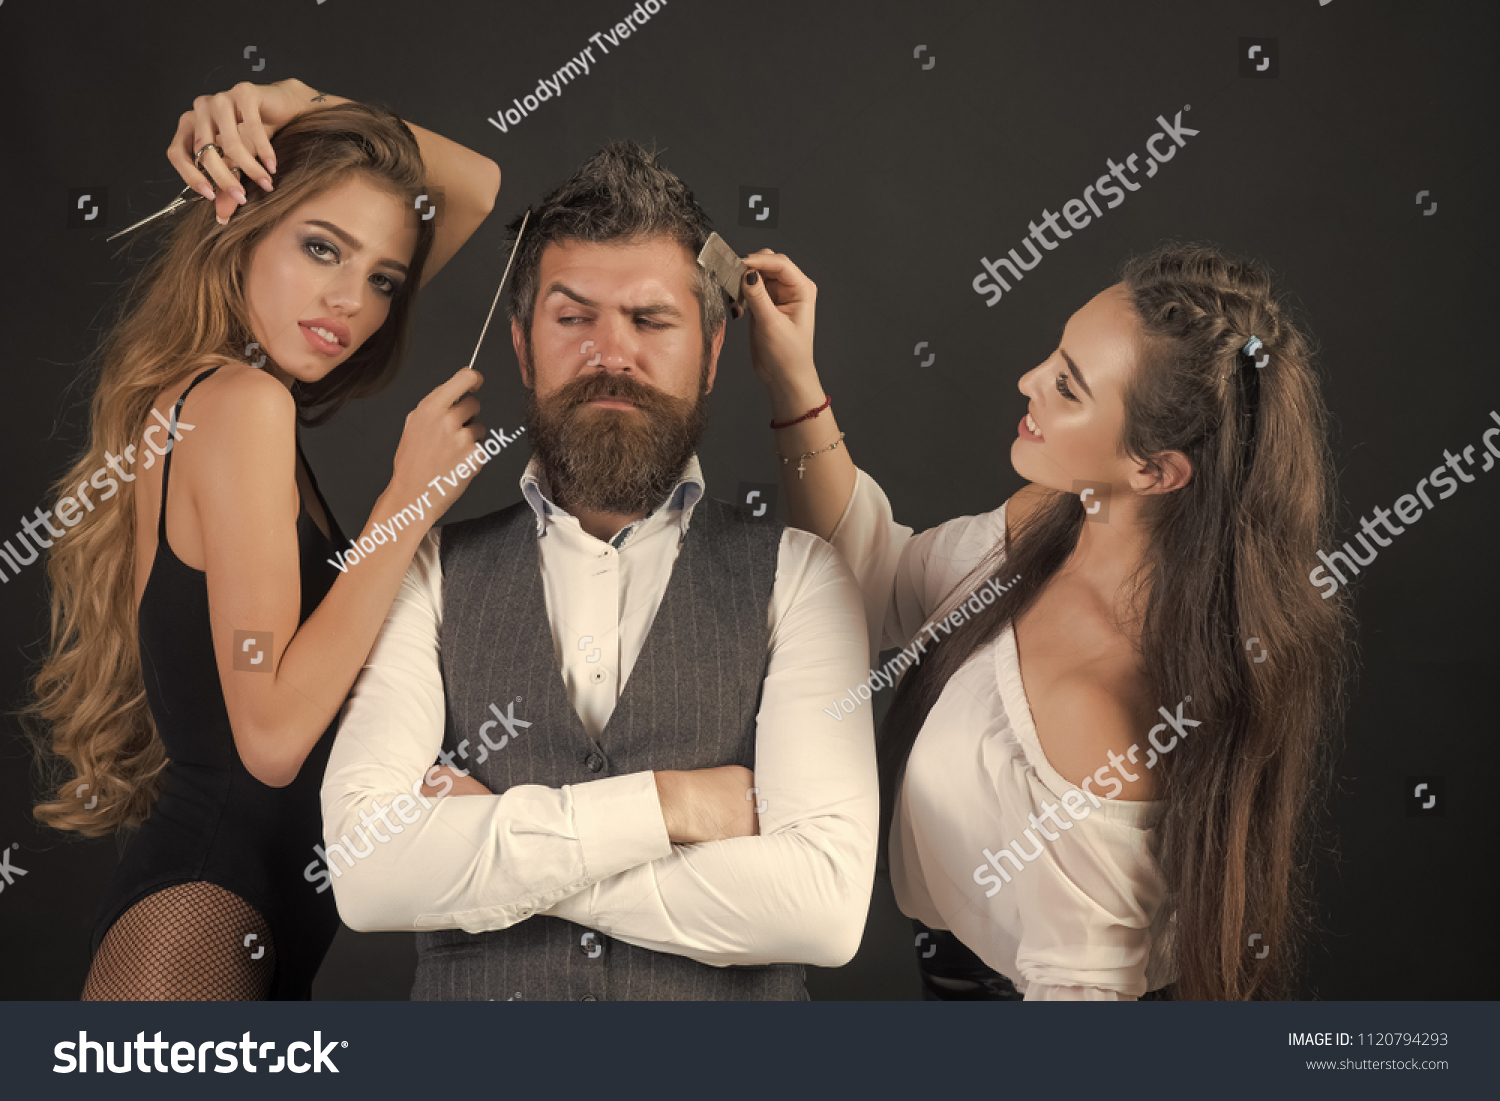 Friends at hairdresser salon. People make haircut, love relations, friendship. Bearded man, sexy women with long hair. Women with comb, scissors cut hair. Barbershop, fashion, beauty, hipster #1120794293